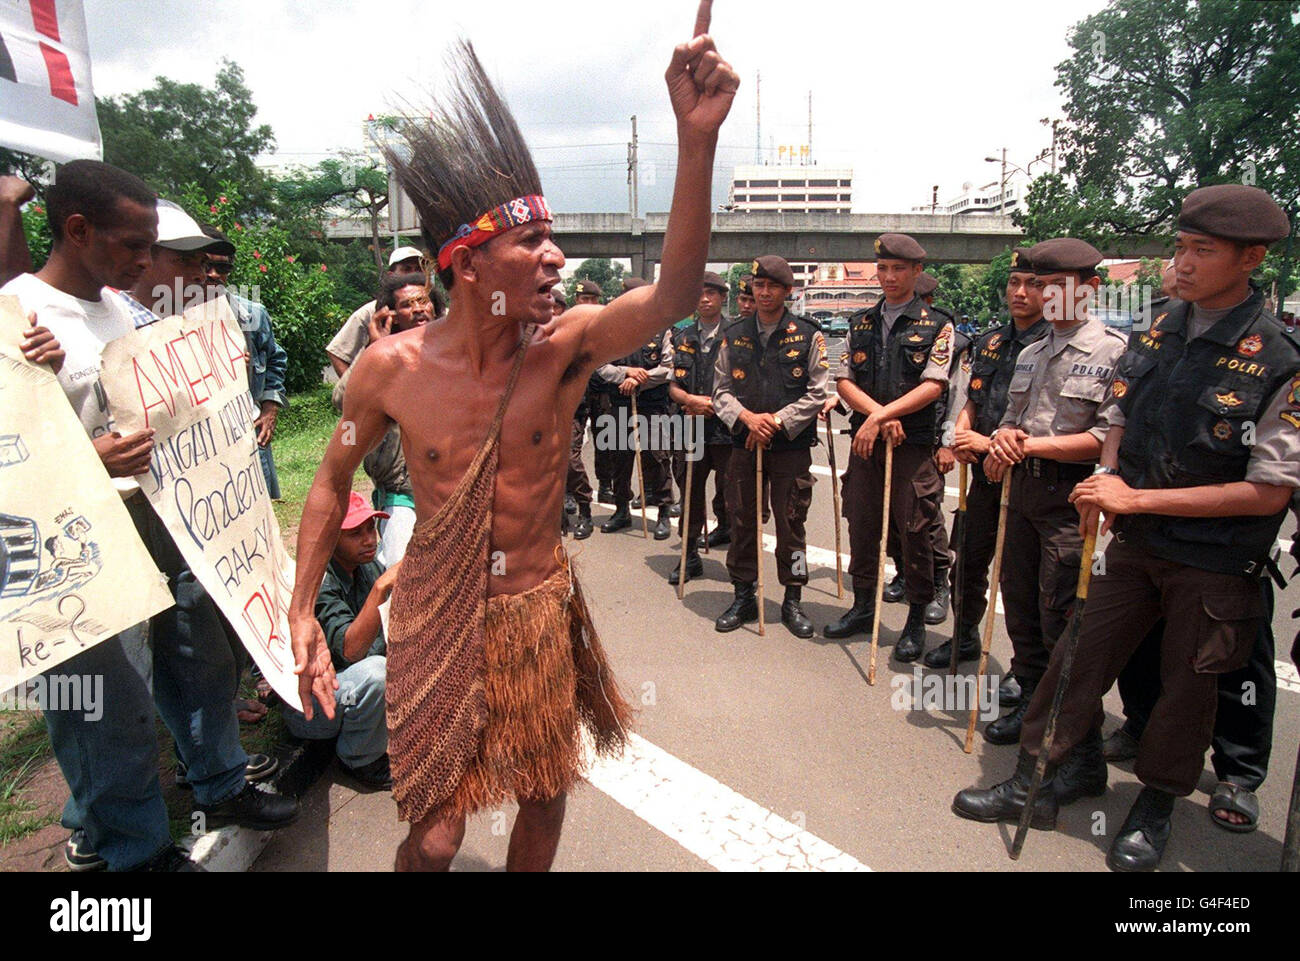 JKT02-19981102-JAKARTA, INDONESIA: An activist from Irian Jaya, dressed in traditional wear, gestures during a demonstration in front of the American embassy, guarded by a cordon of security forces in Jakarta 02 November. The protestors demanded the review of the Freeport contract, including setting an independent probe team and management audit of the company. EPA/AFP PHOTO/KEY Stock Photo